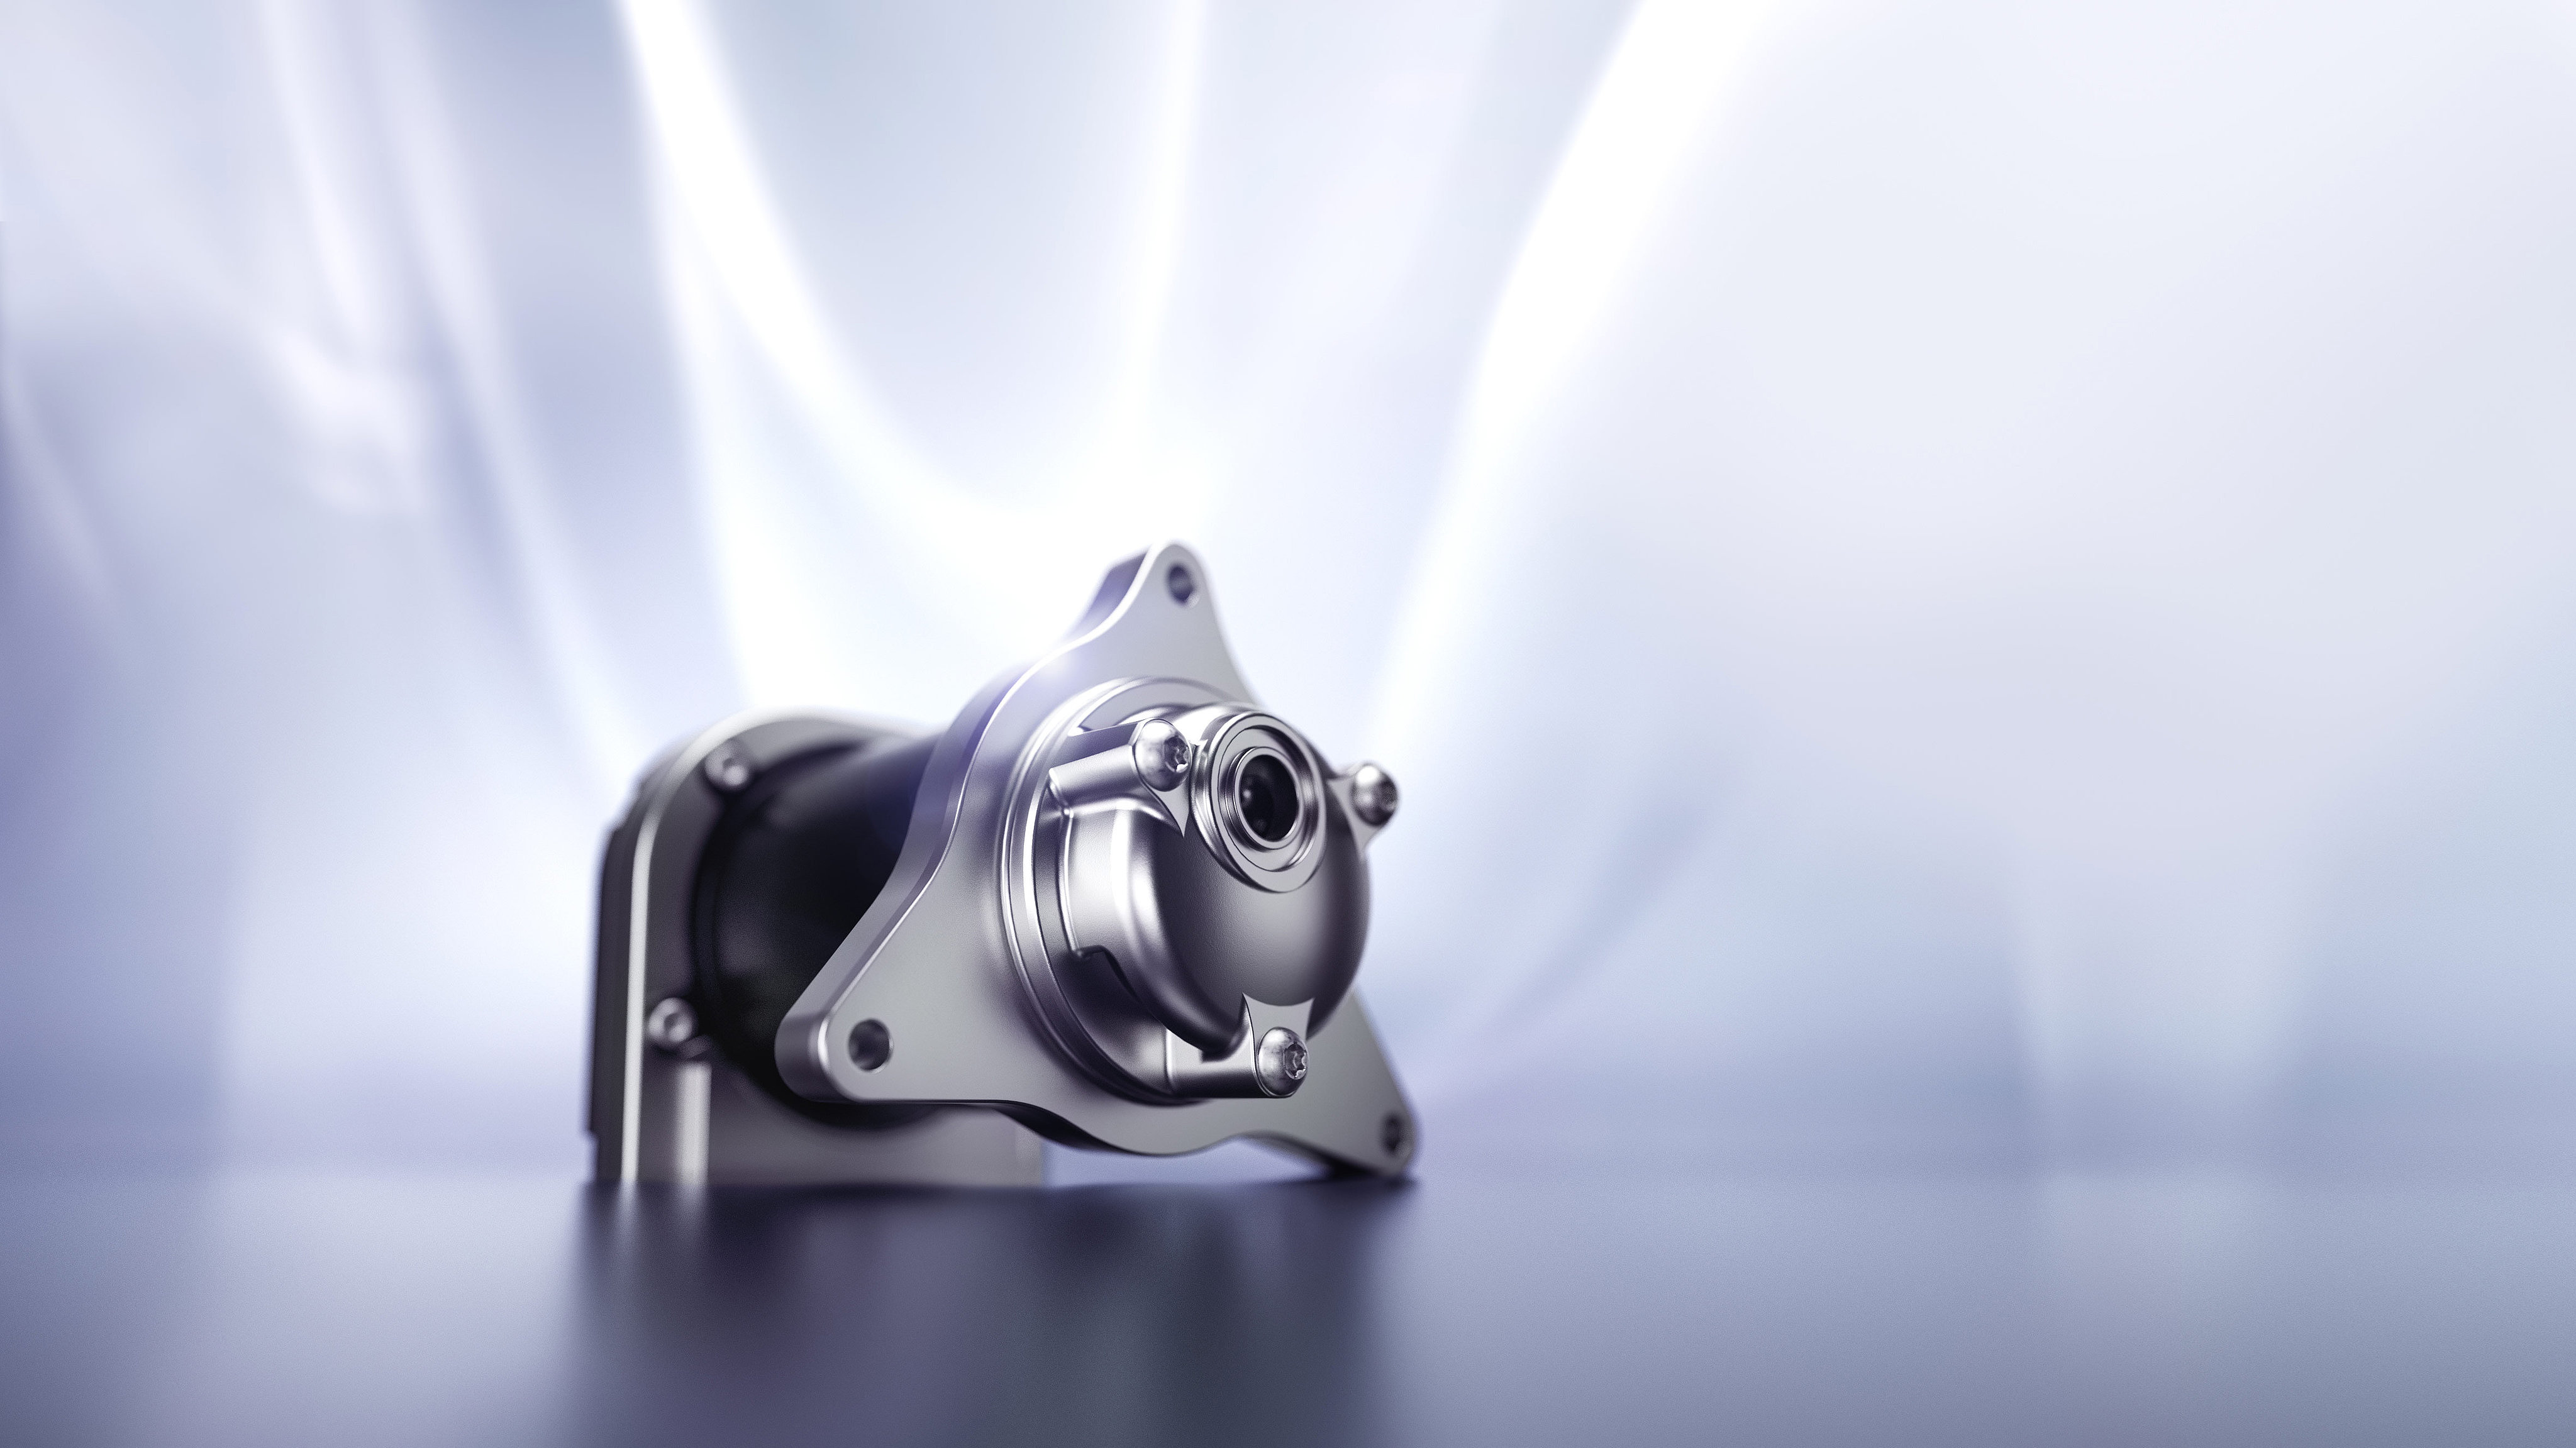 The perspective shows the sophisticated product design of the eLOP transmission pump for passenger vehicles.